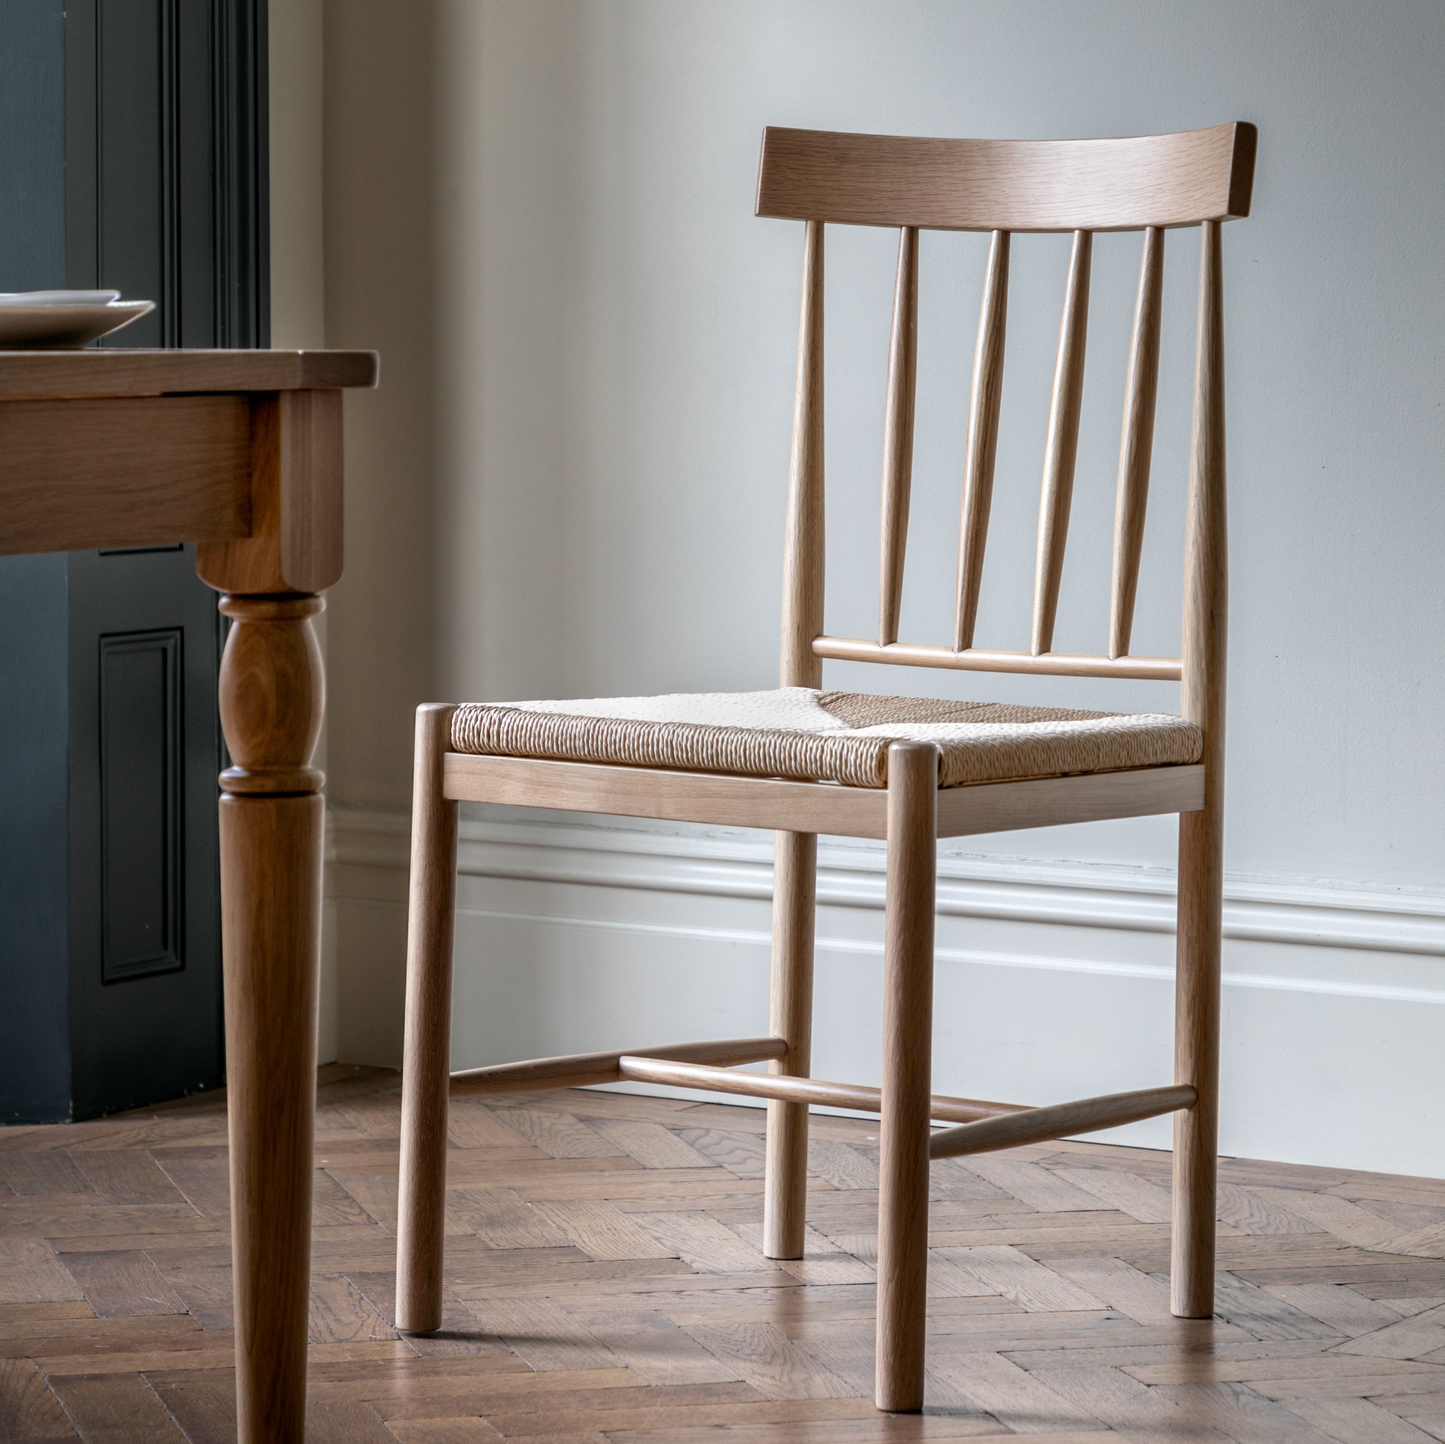 A pair of Buckland Dining Chairs in oak, from Kikiathome.co.uk, complements the interior decor of a room furnished with a wooden table.